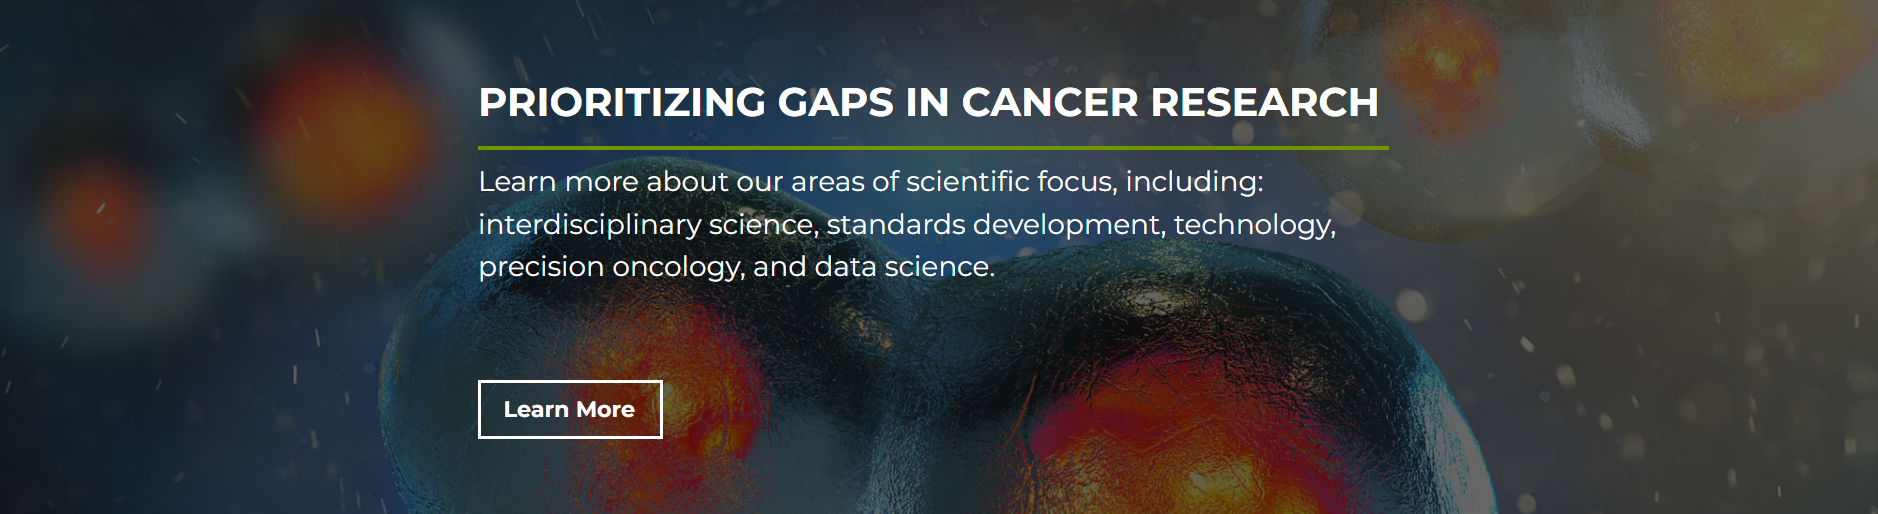 Prioritizing Gaps in Cancer Research